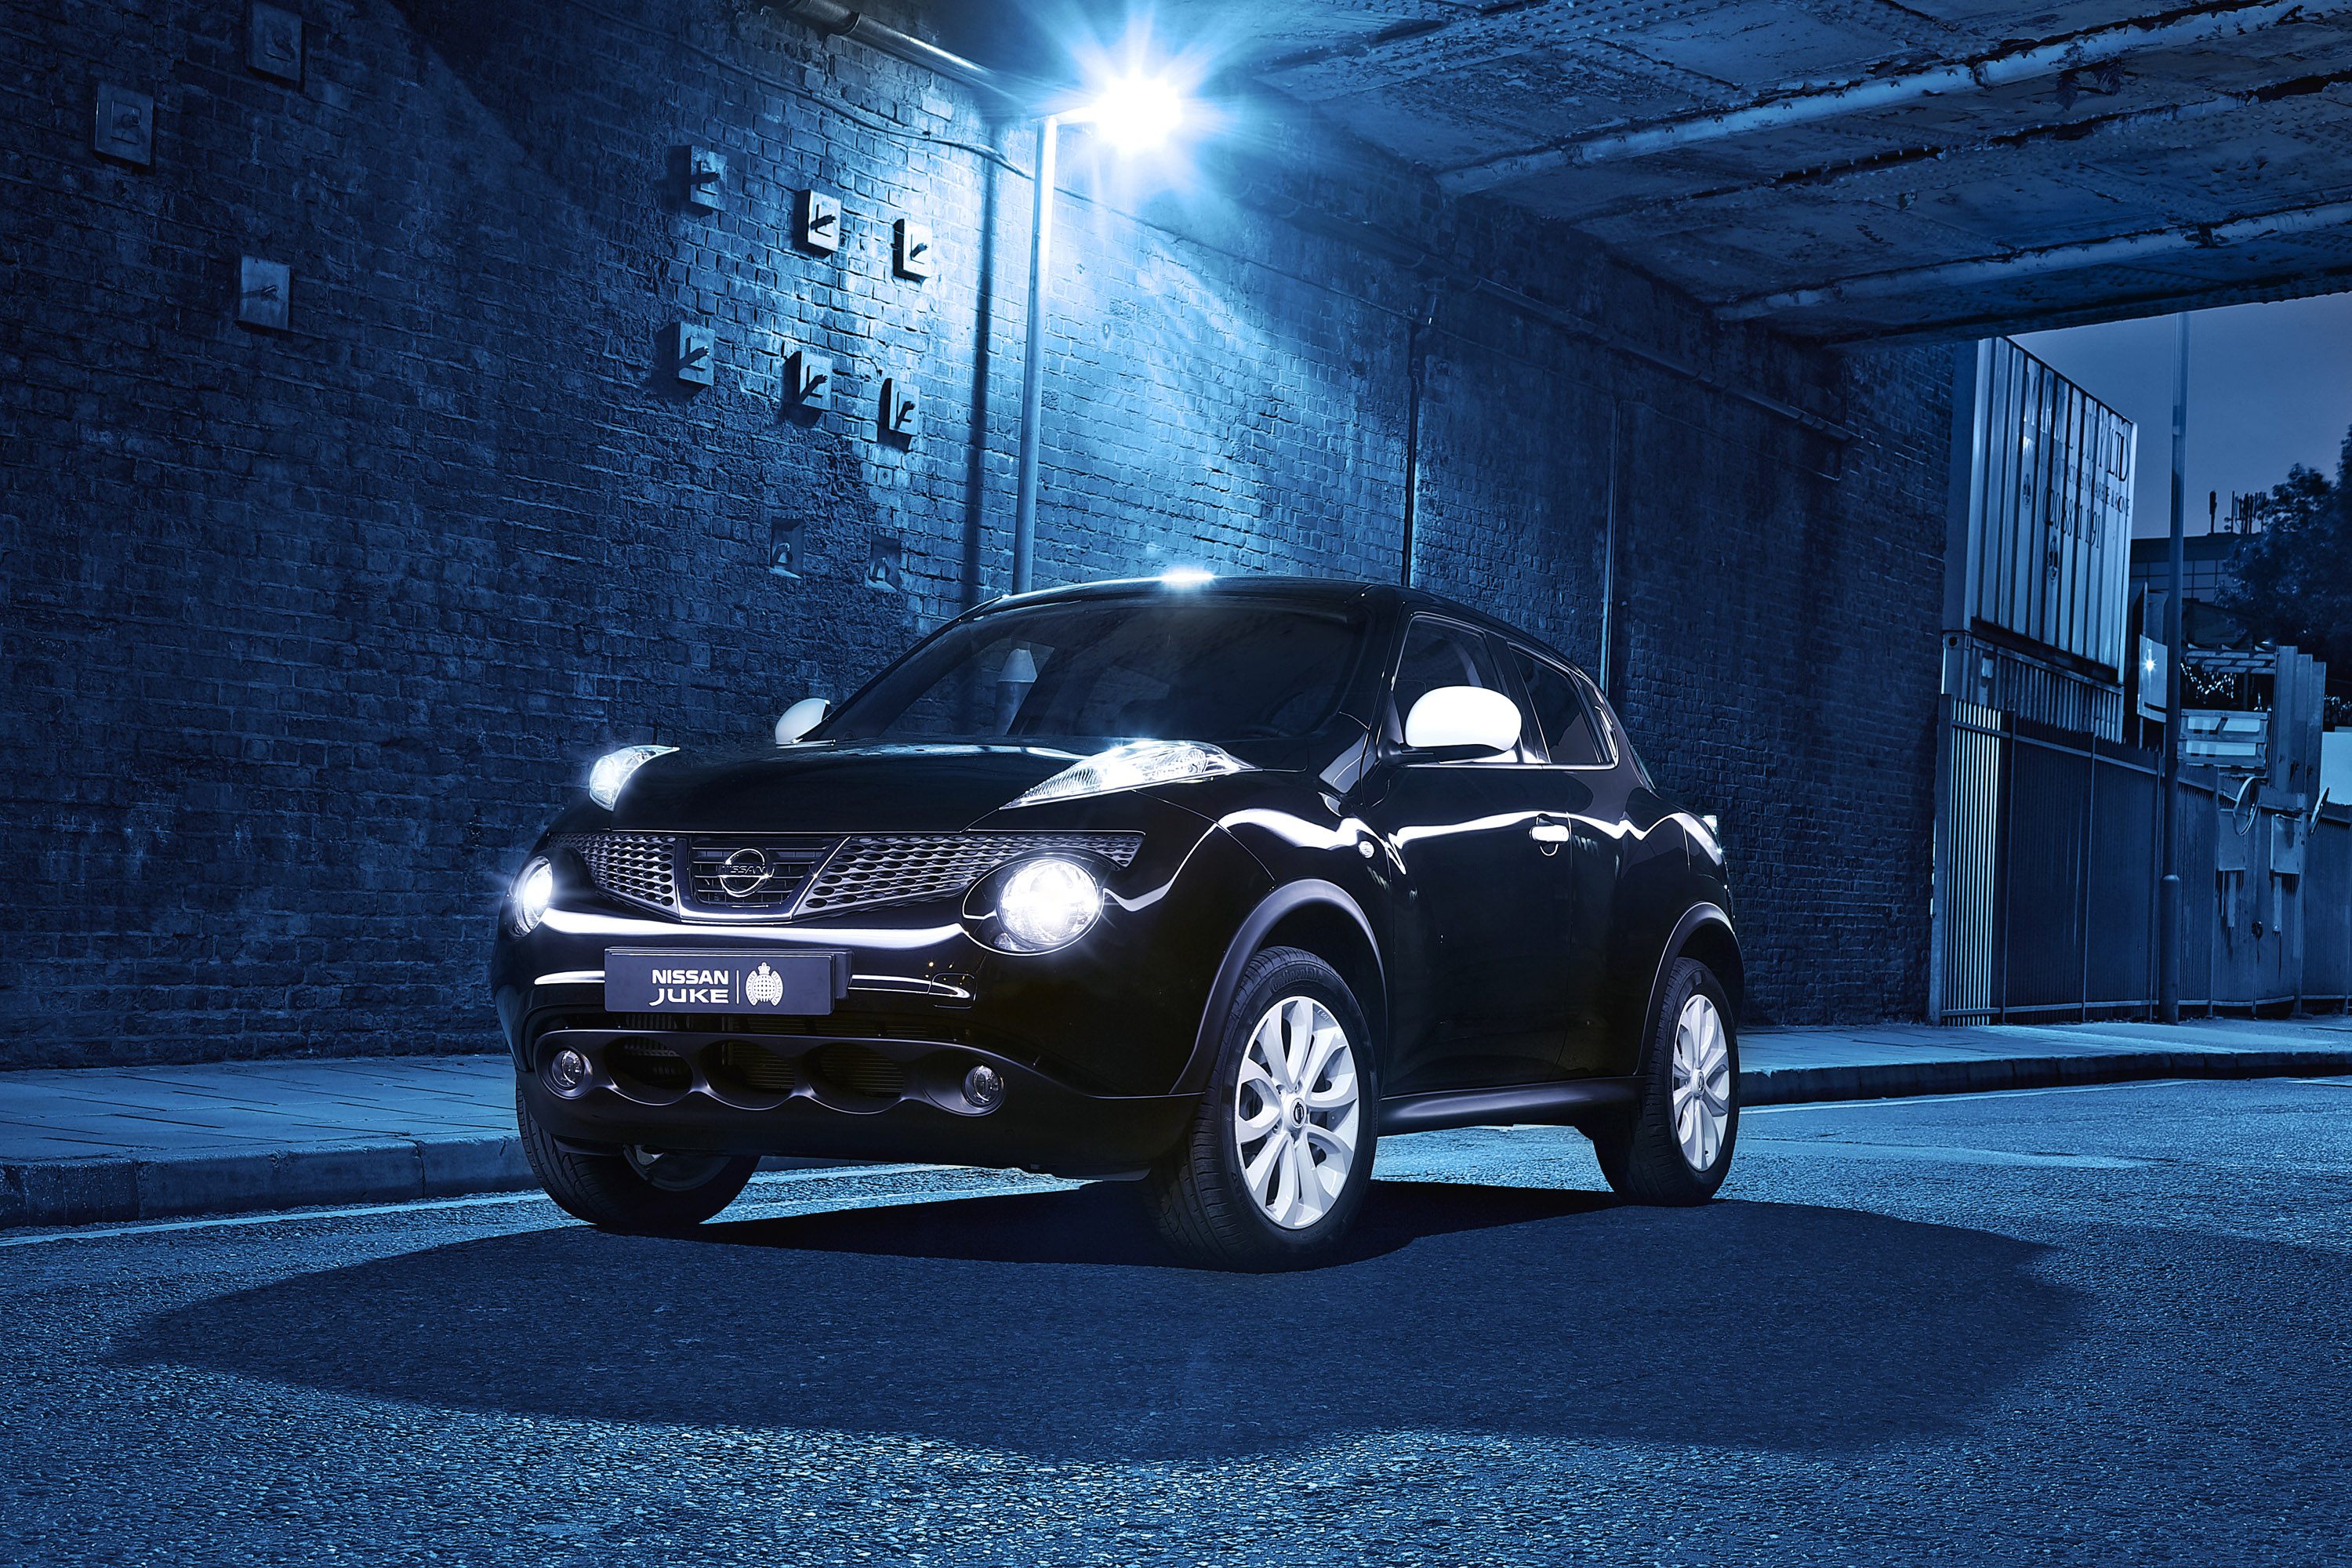 Nissan Juke Ministry of Sound Limited Edition photo #1